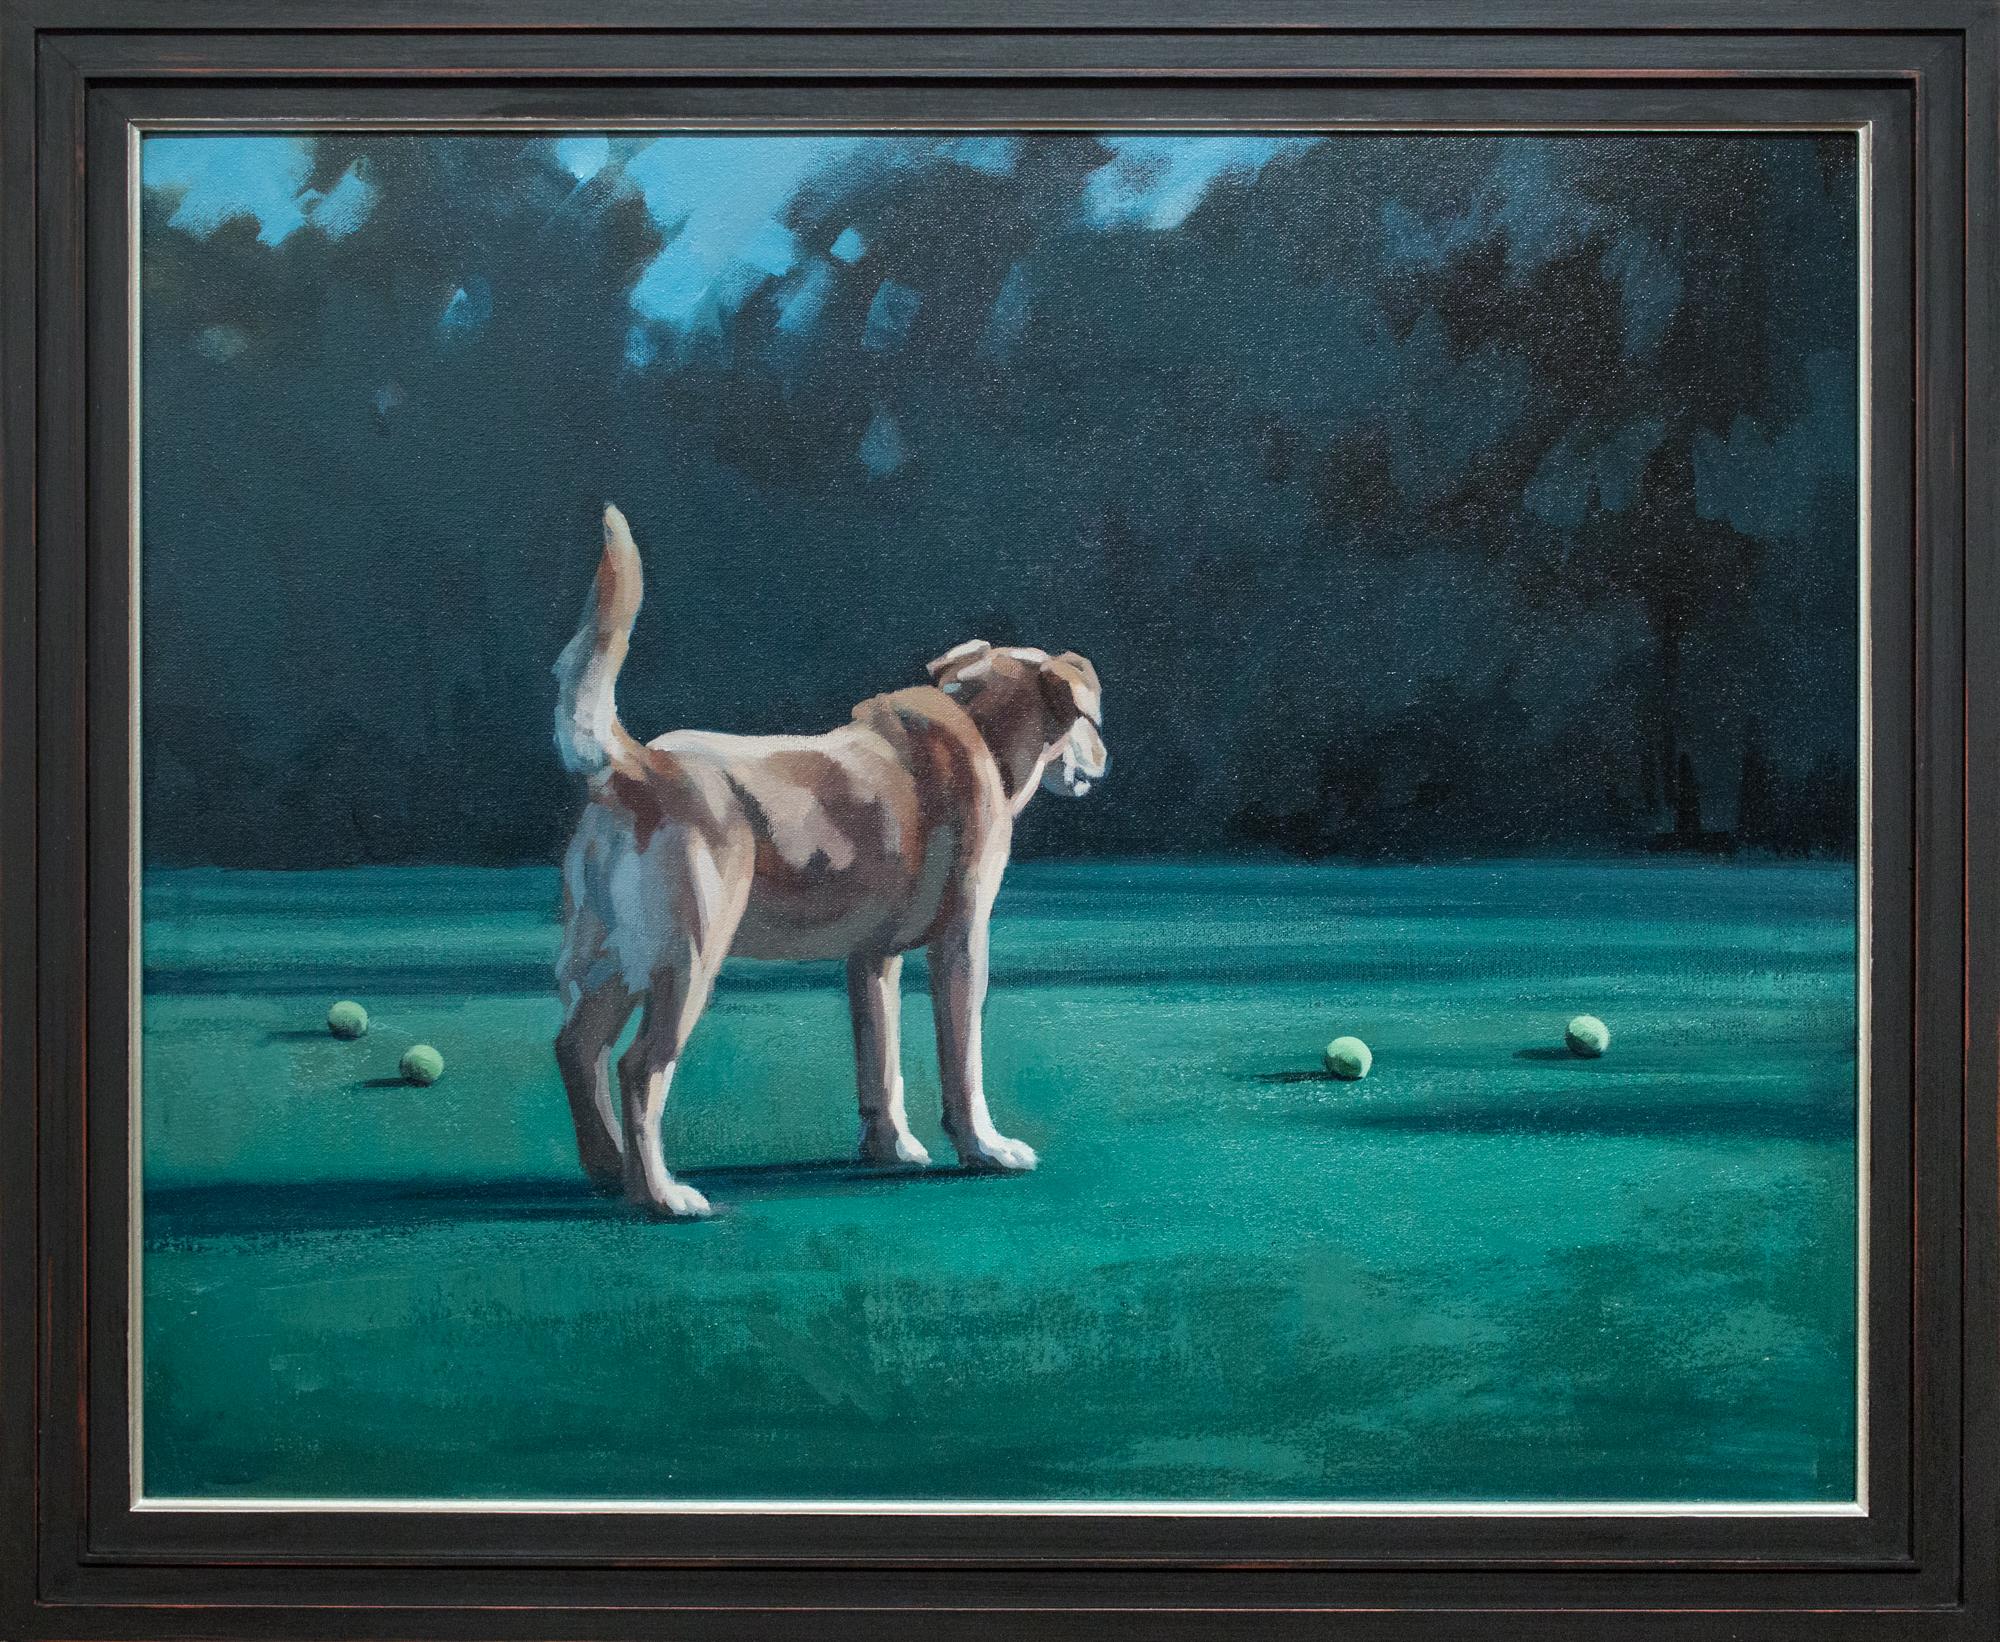 Katherine Fraser Figurative Painting - "In Our Nature", Dog in Landscape with Tennis Balls Oil Painting